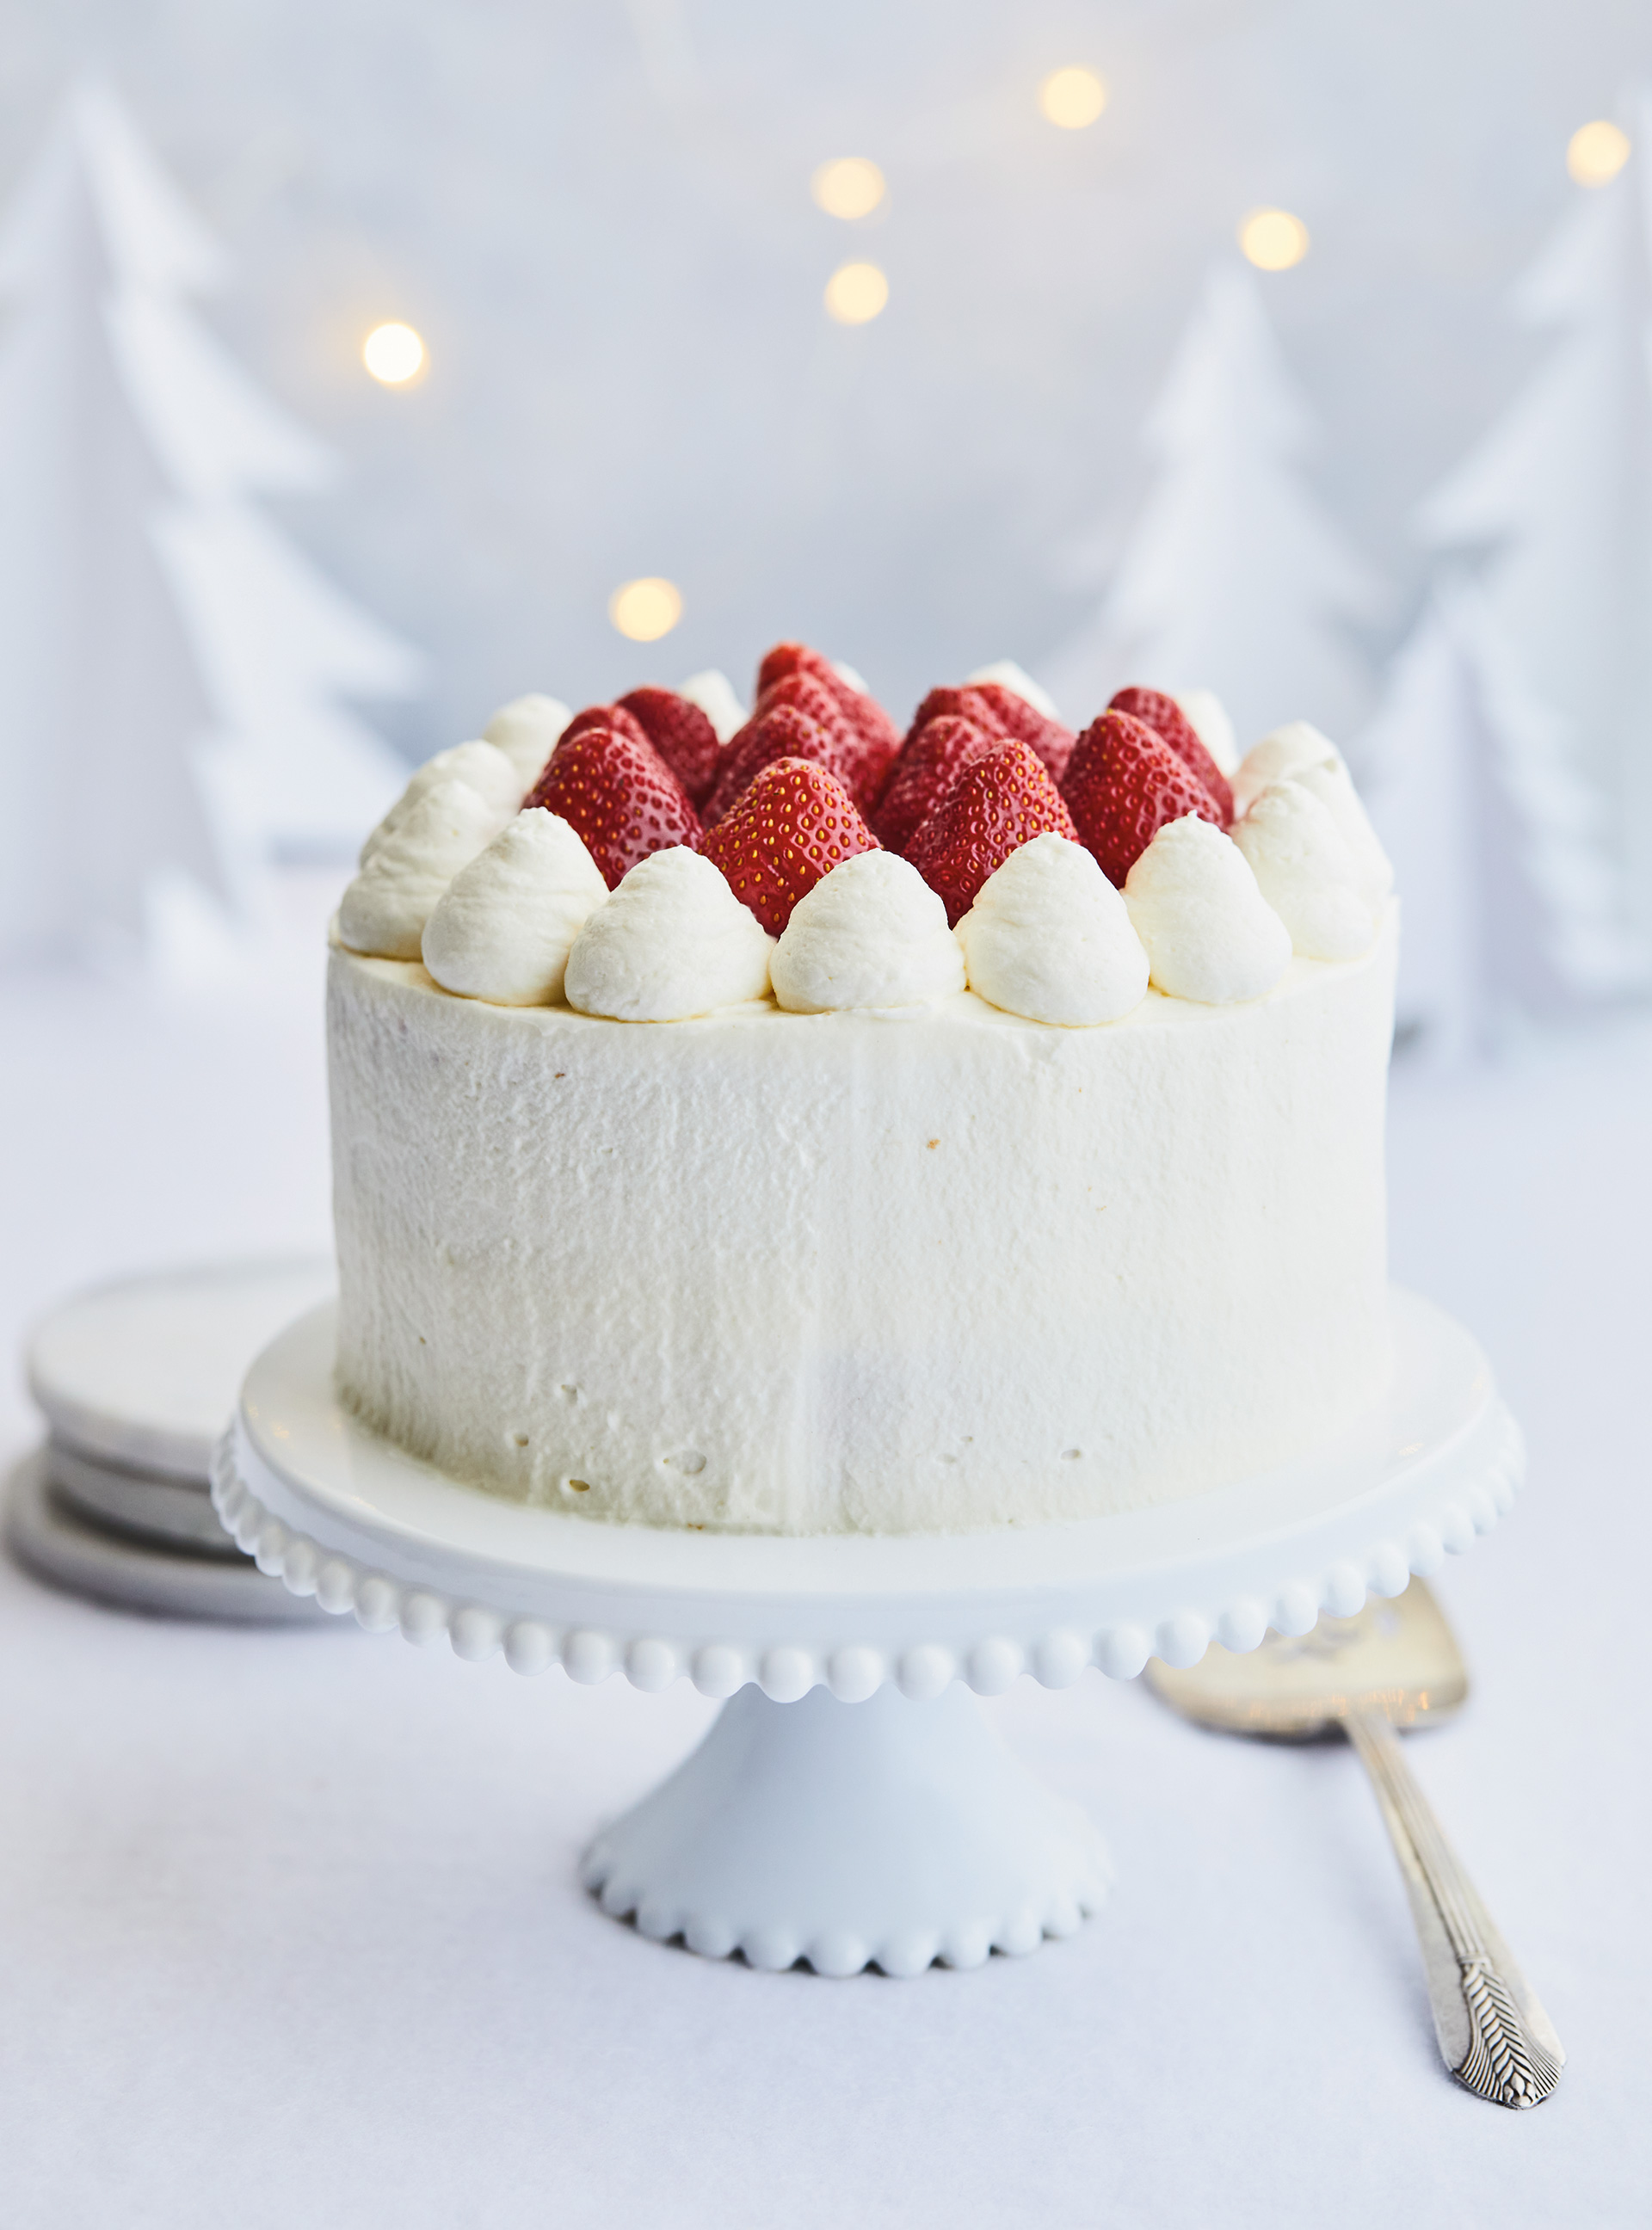 Strawberry Cake with Cream Cheese Frosting - The Seasoned Mom